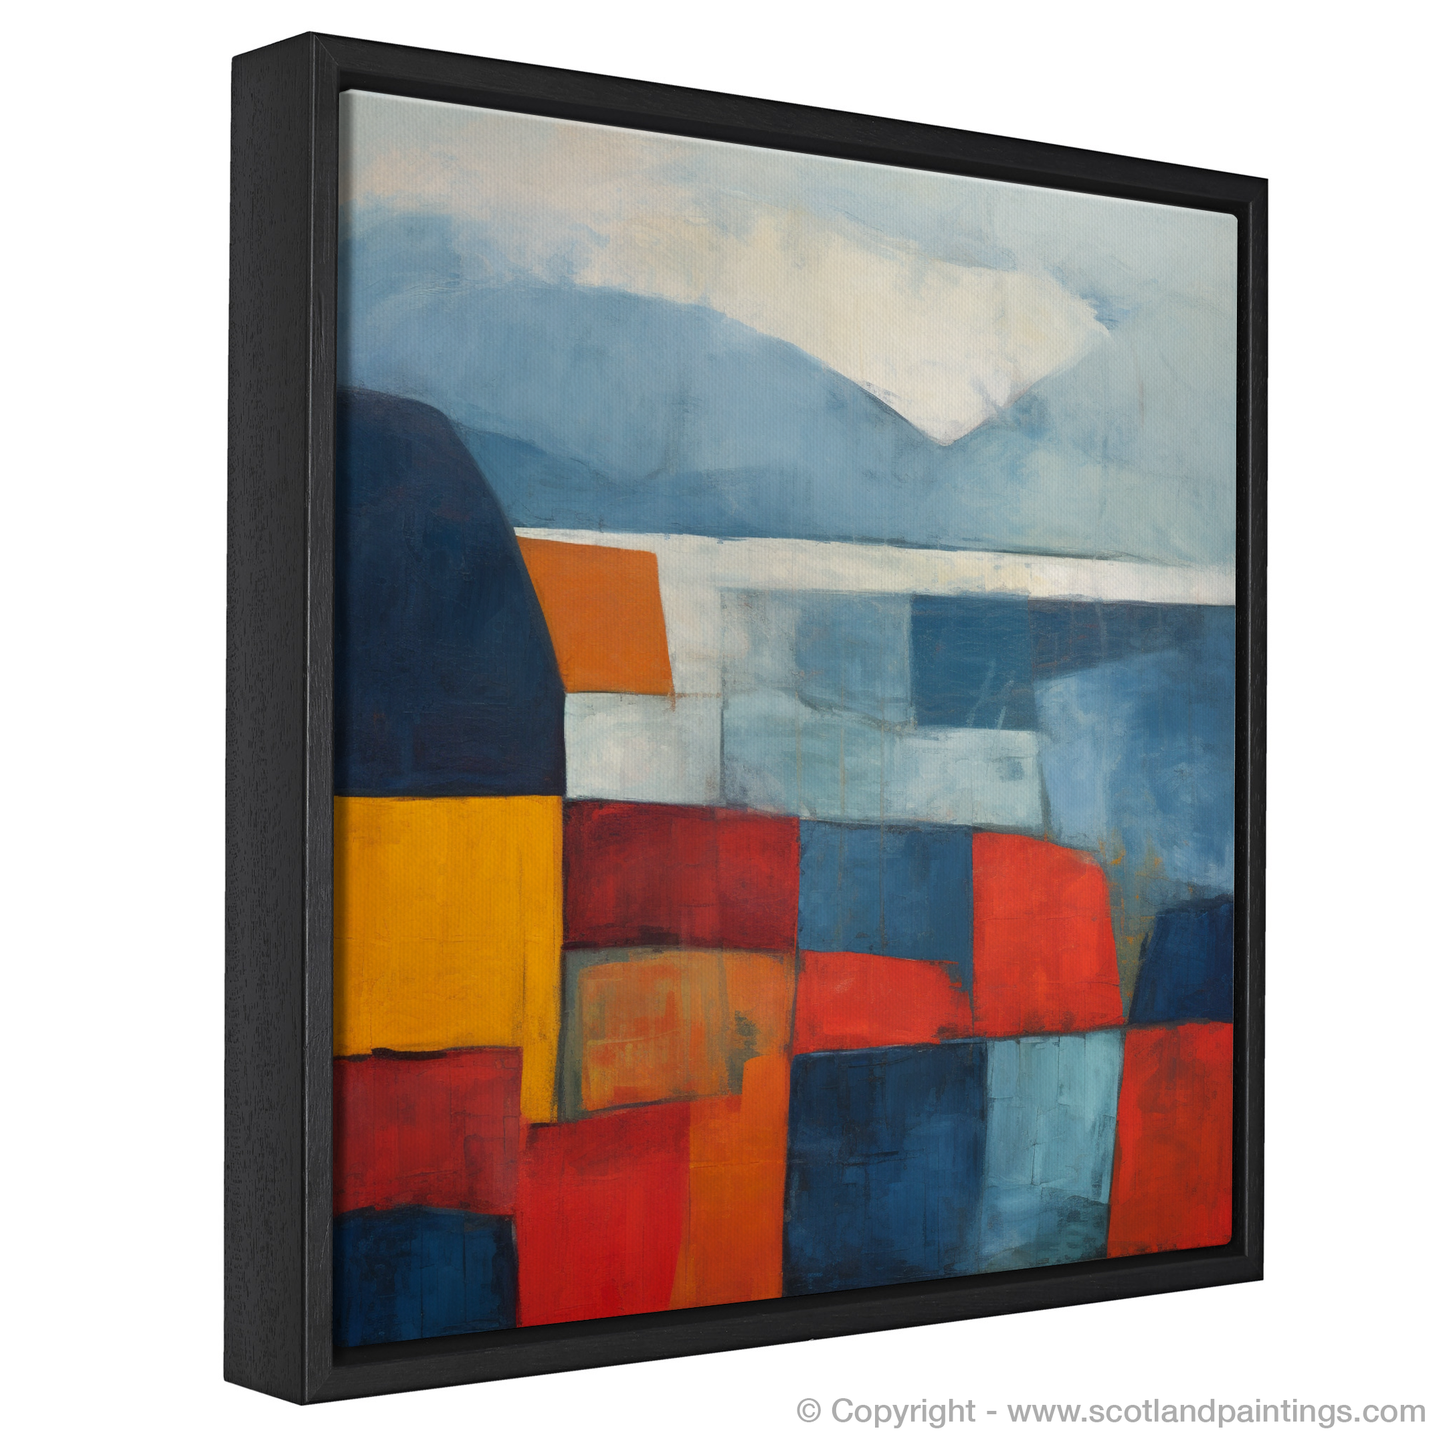 Painting and Art Print of A loch in Scotland entitled "Majestic Loch Abstract".